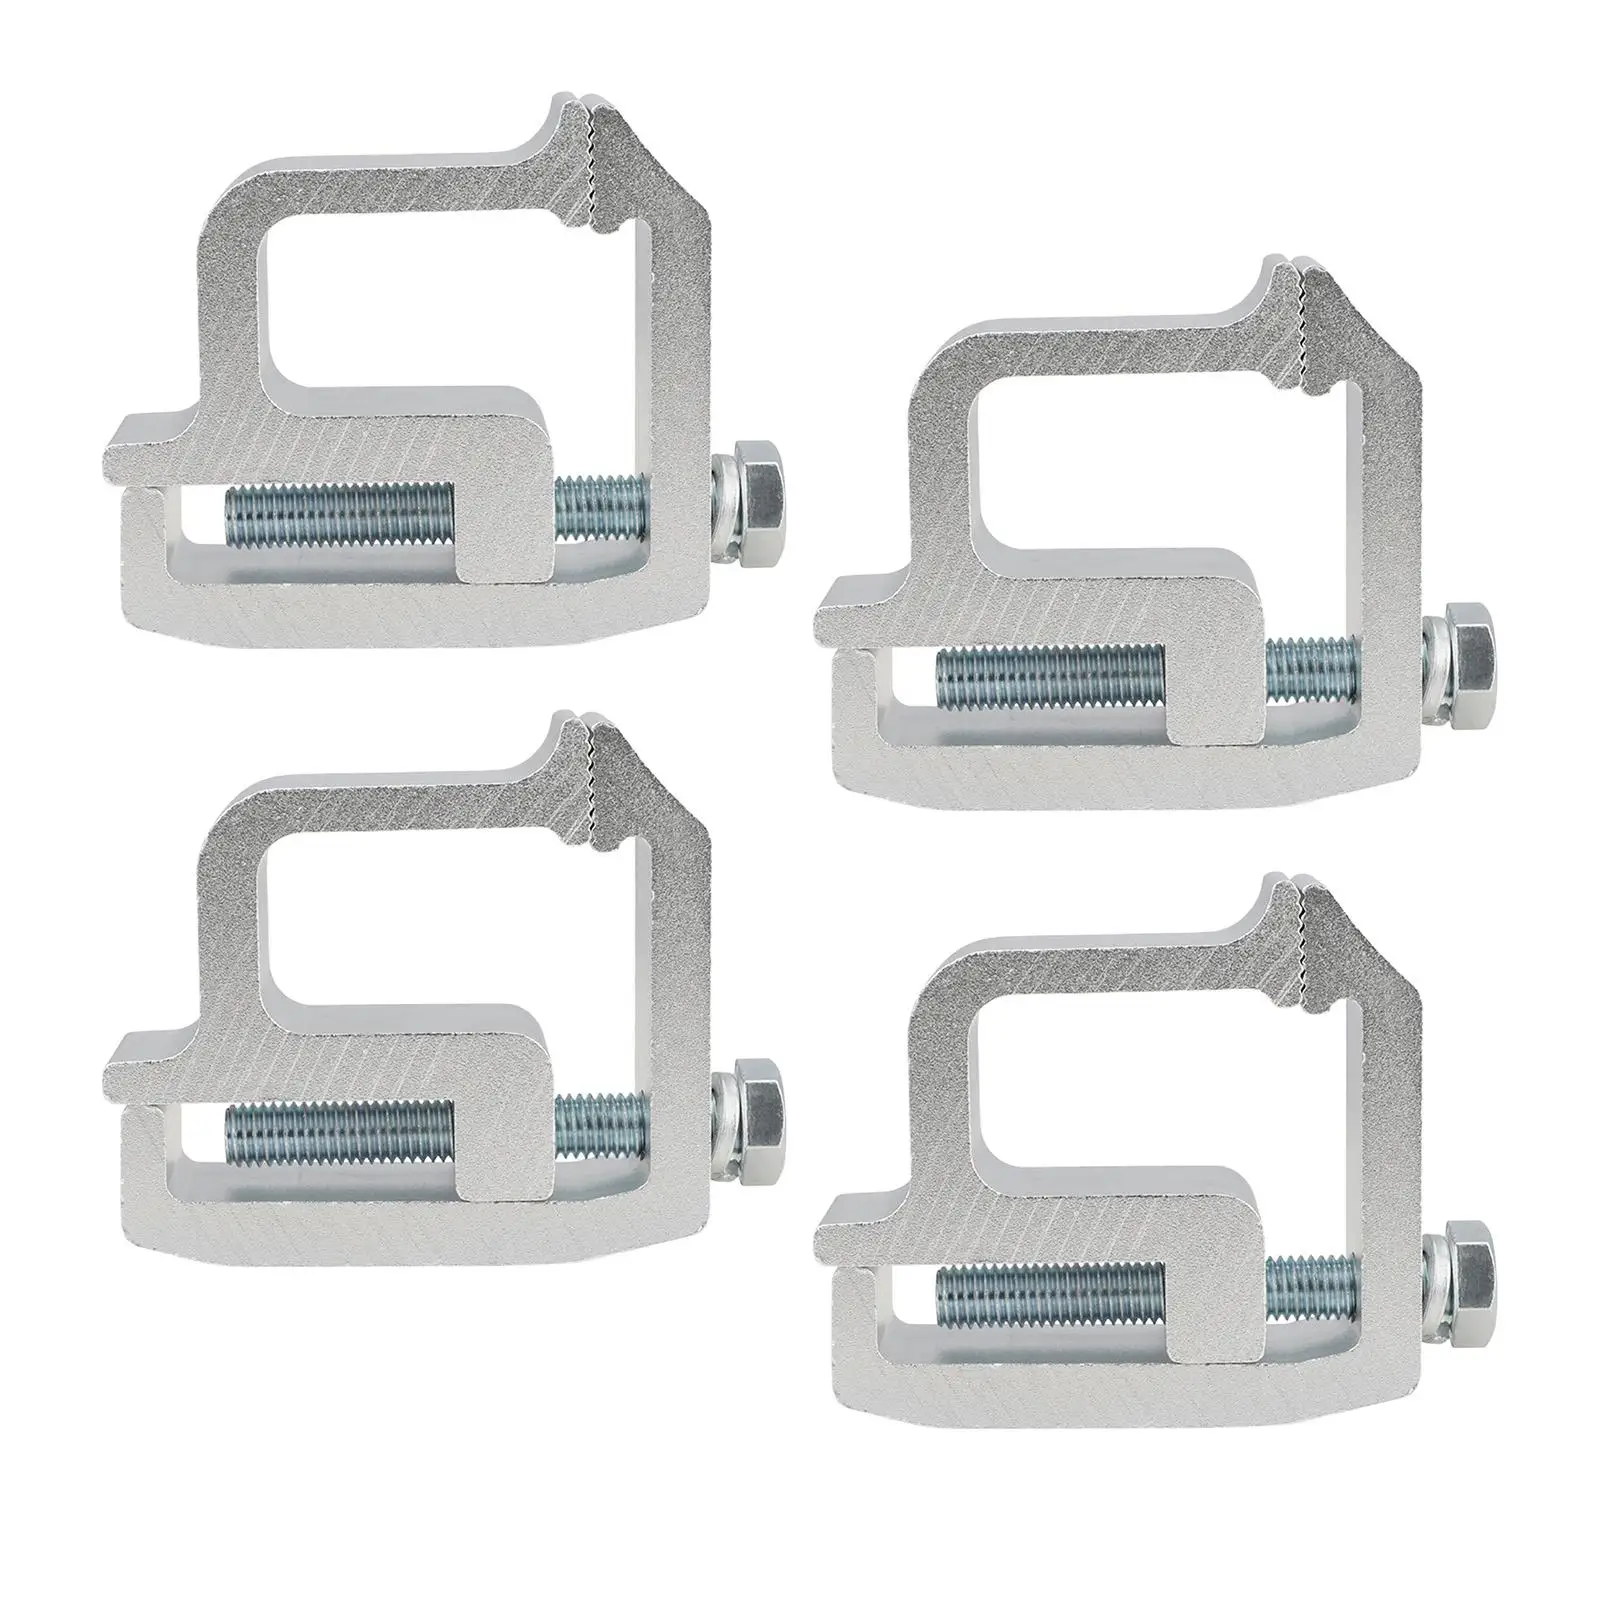 Mounting Clamps Truck Caps Camper Shell for    1500 2500 3500 and More Pick-up Truck Models Truck Bed Parts Silver